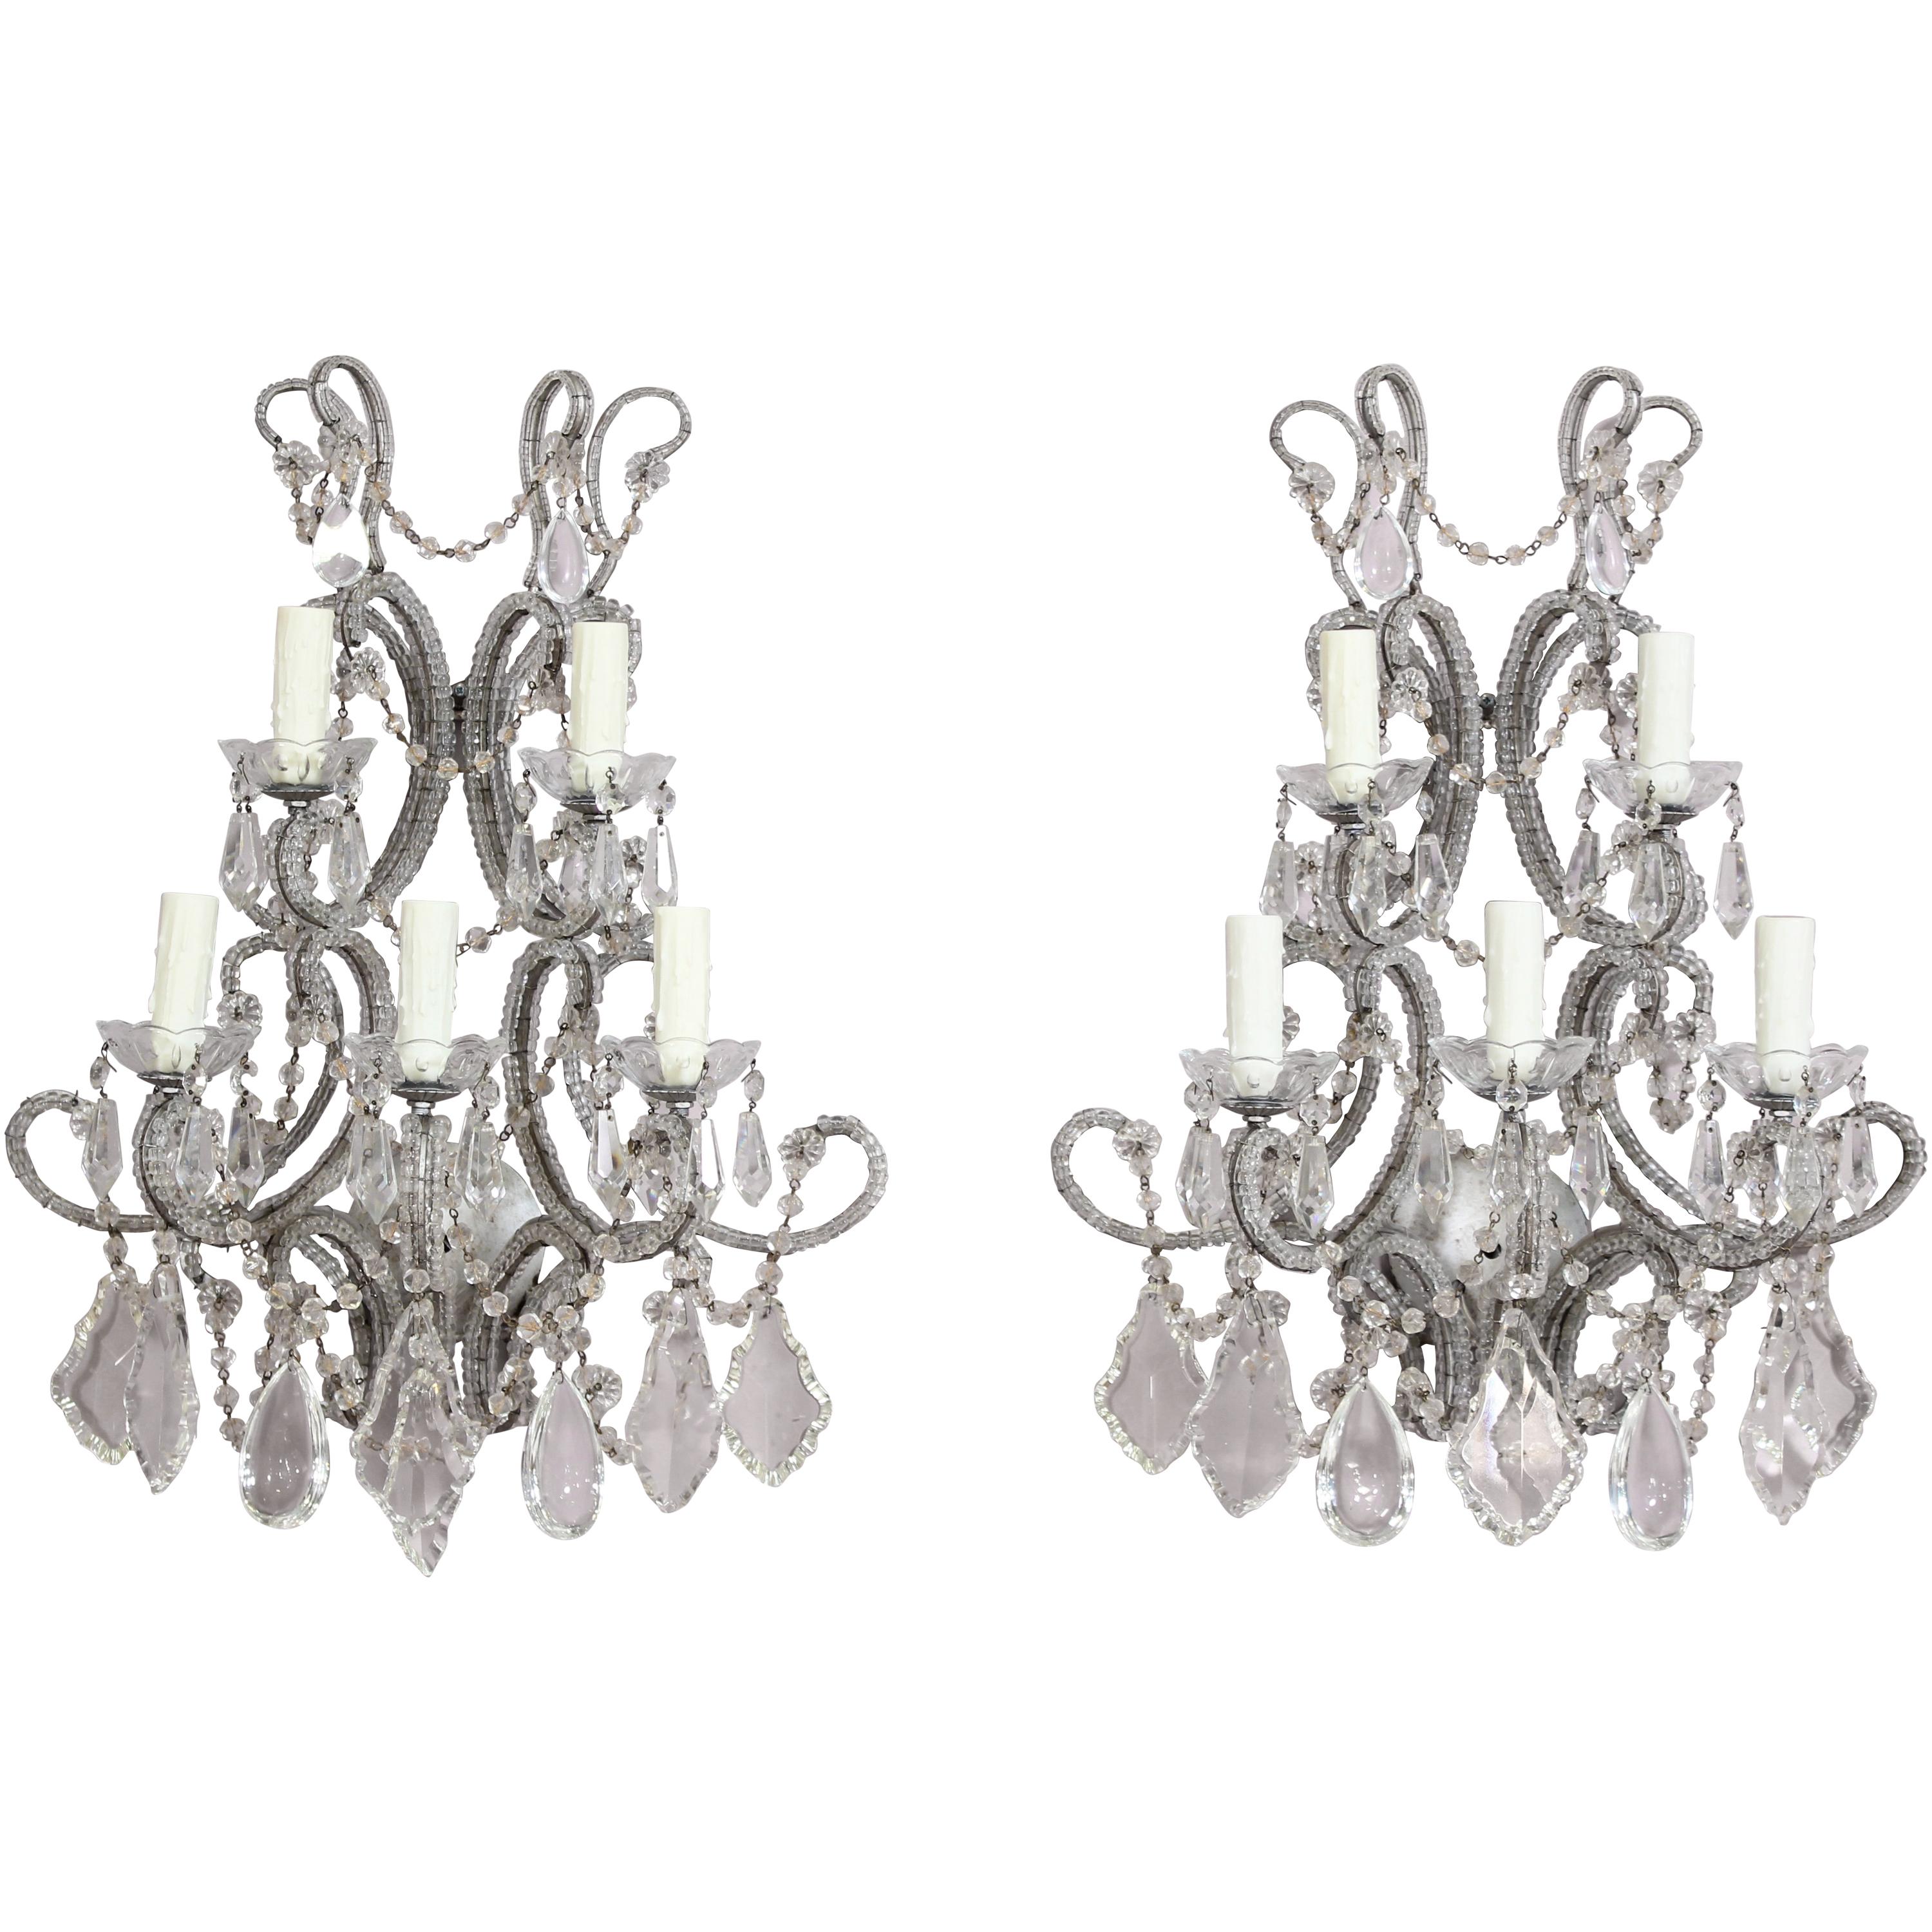 French Silvered Iron and Crystal Beaded Sconces